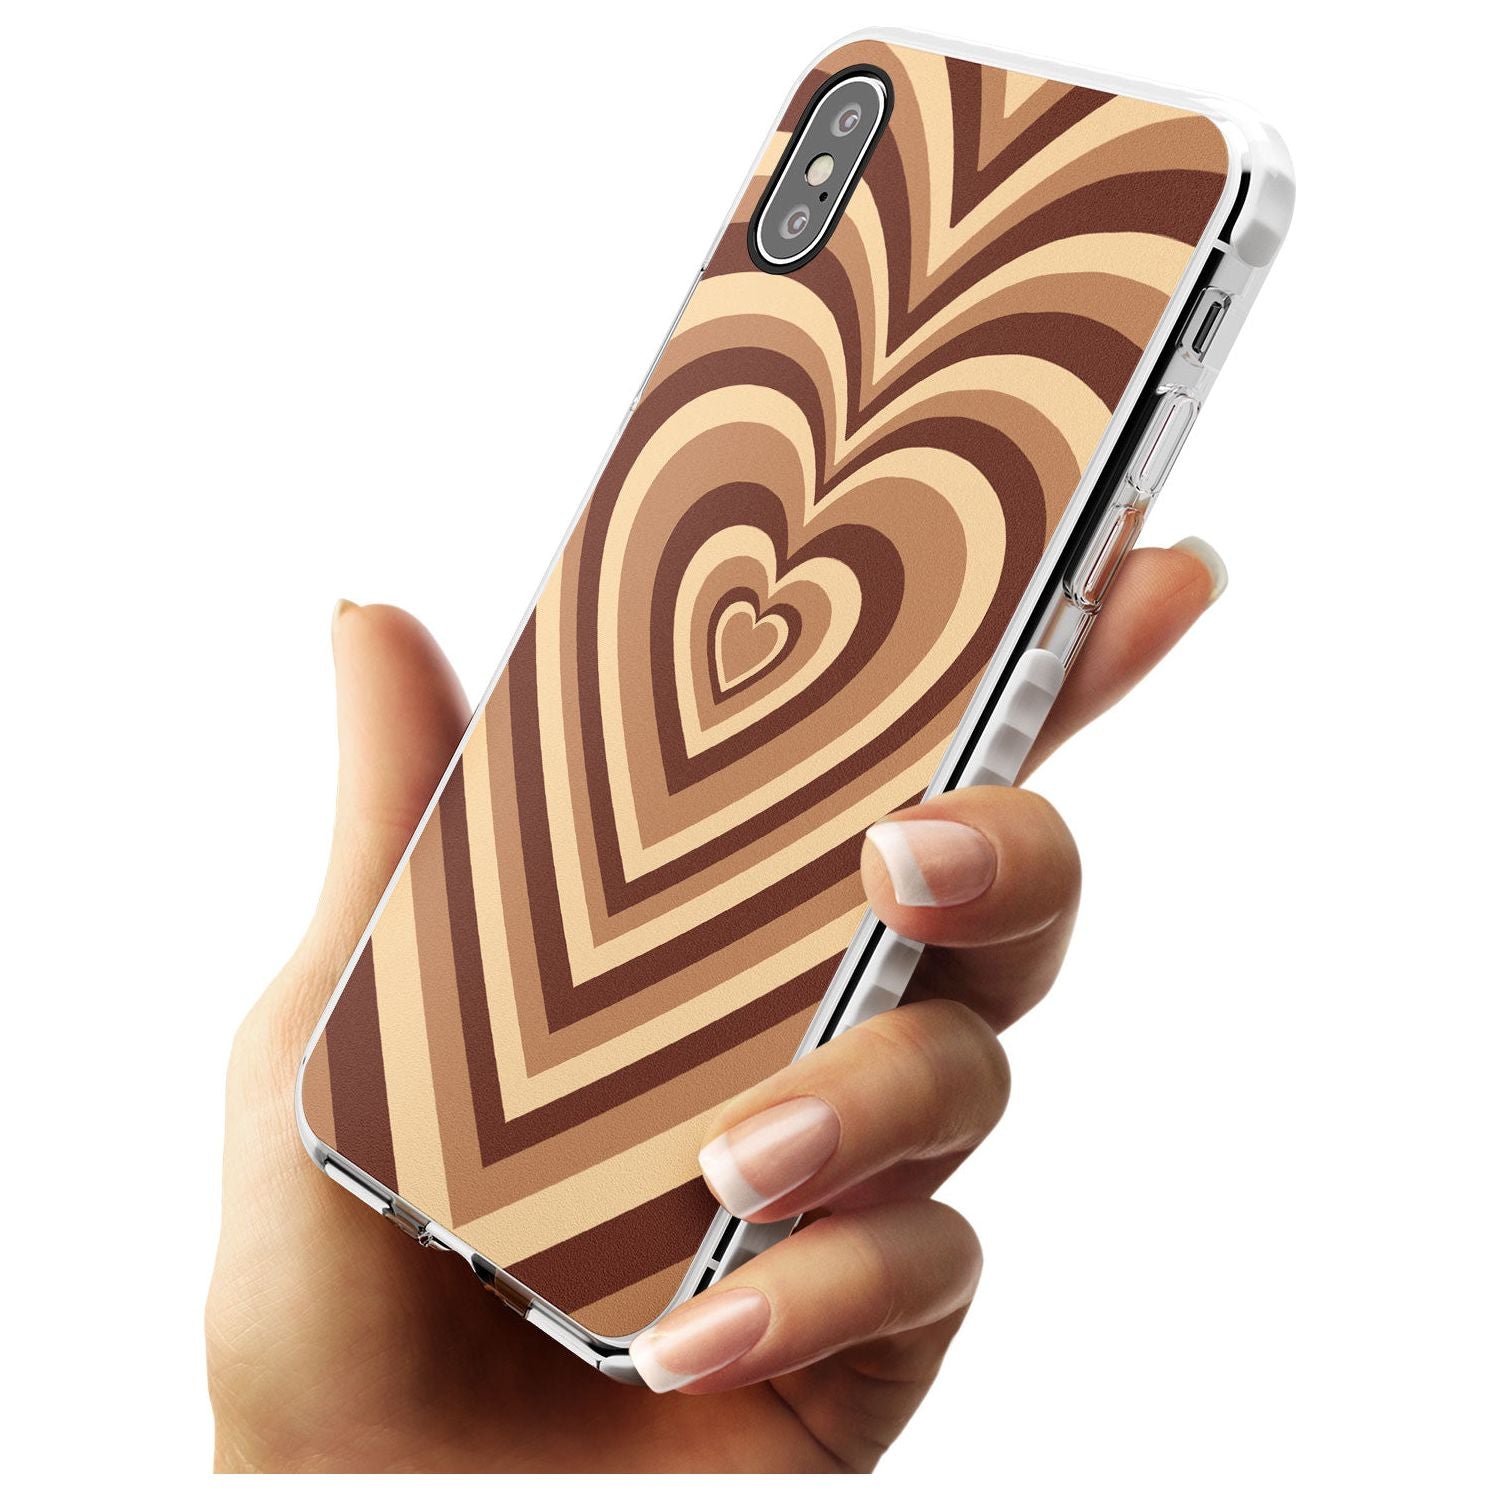 Latte Heart Illusion Impact Phone Case for iPhone X XS Max XR